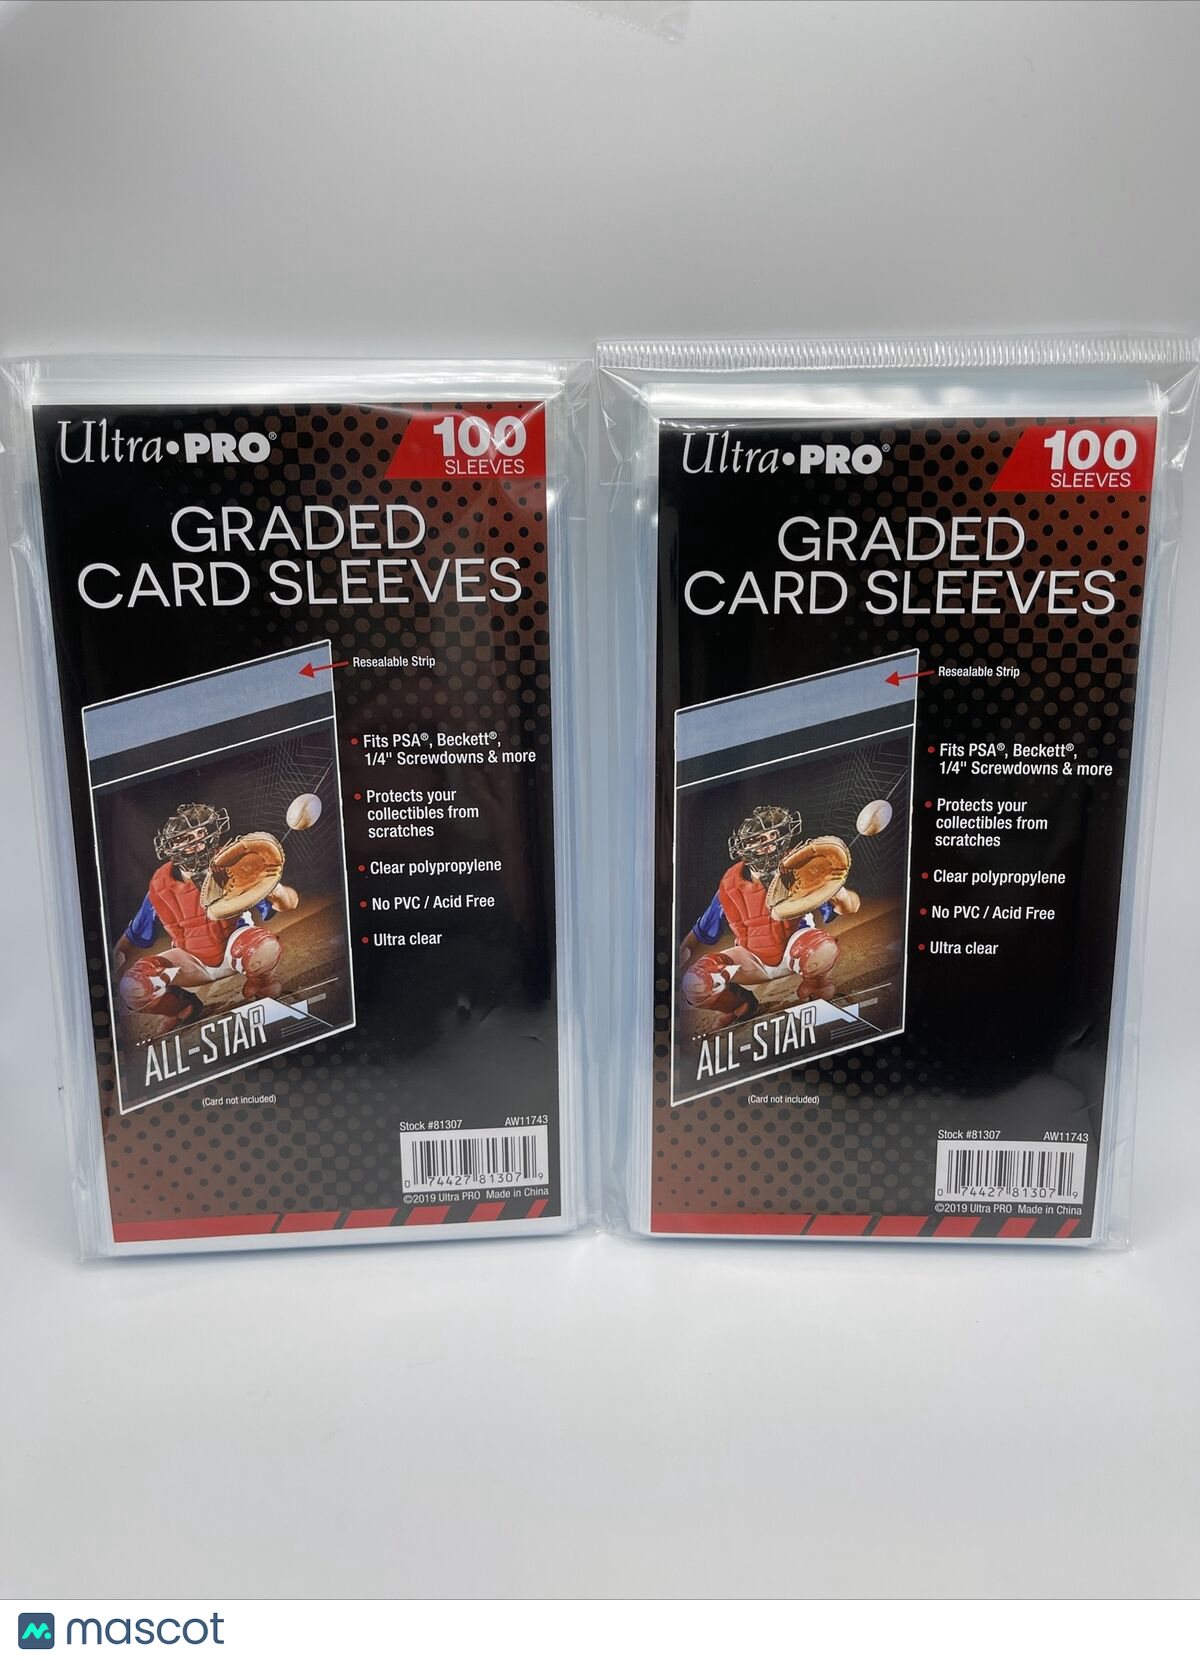 Ultra Pro GRADED Card Sleeves 2 Packs of 100, 200 Total